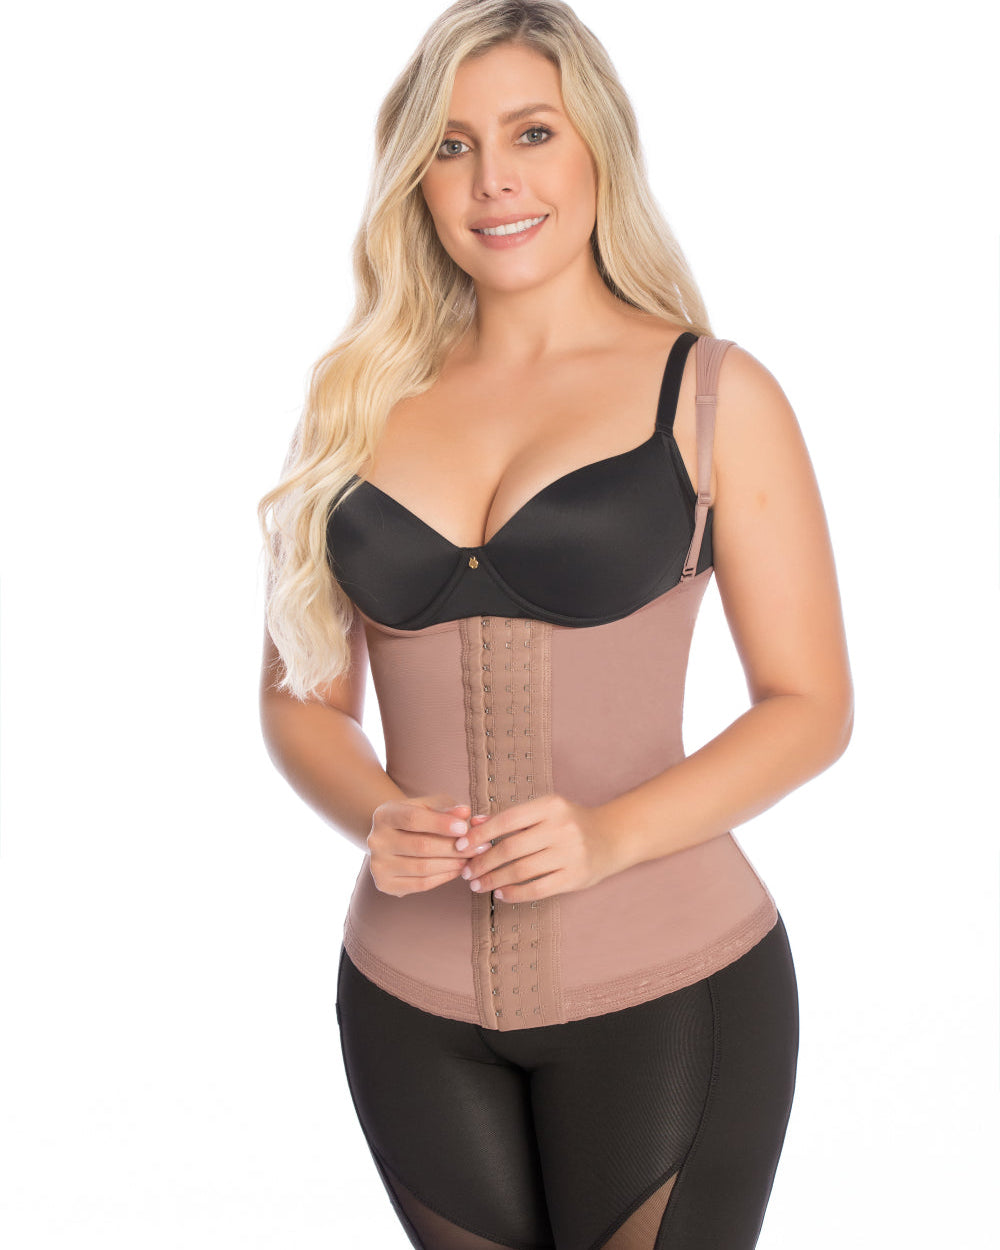 Abdominal Girdle With Front Suspenders